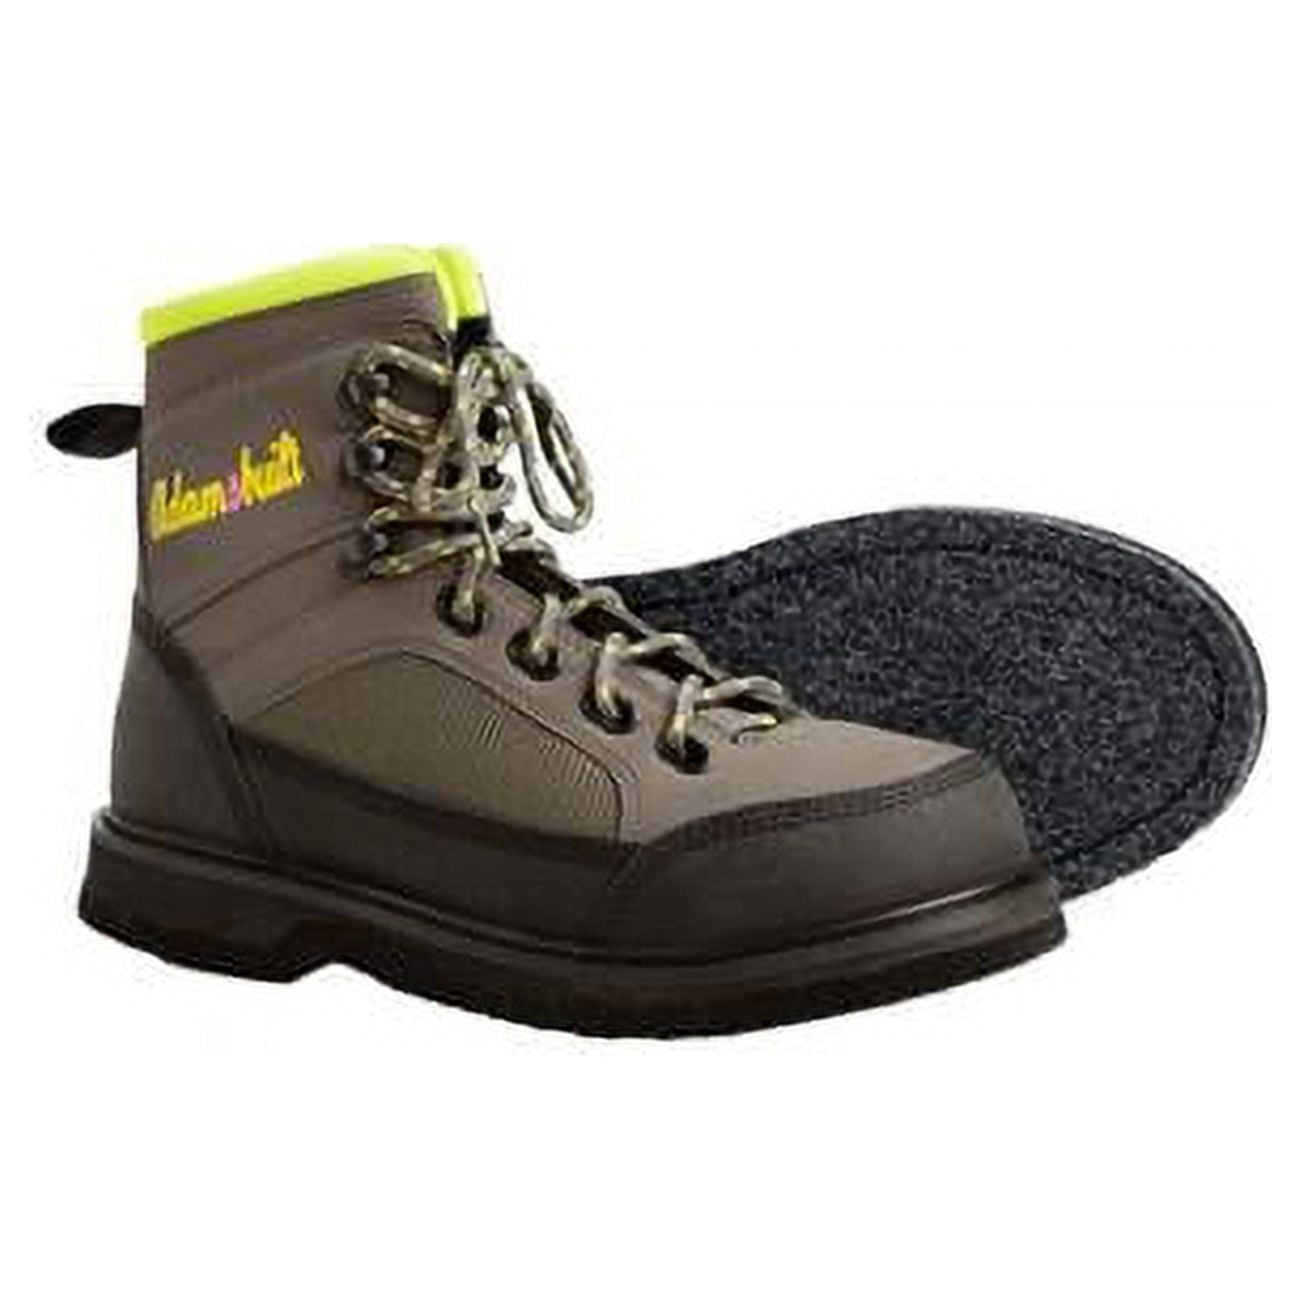 Picture of Adamsbuilt Fishing ABWSRWB-6 Womens Smith River Felt Sole Wading Boot - Size 6